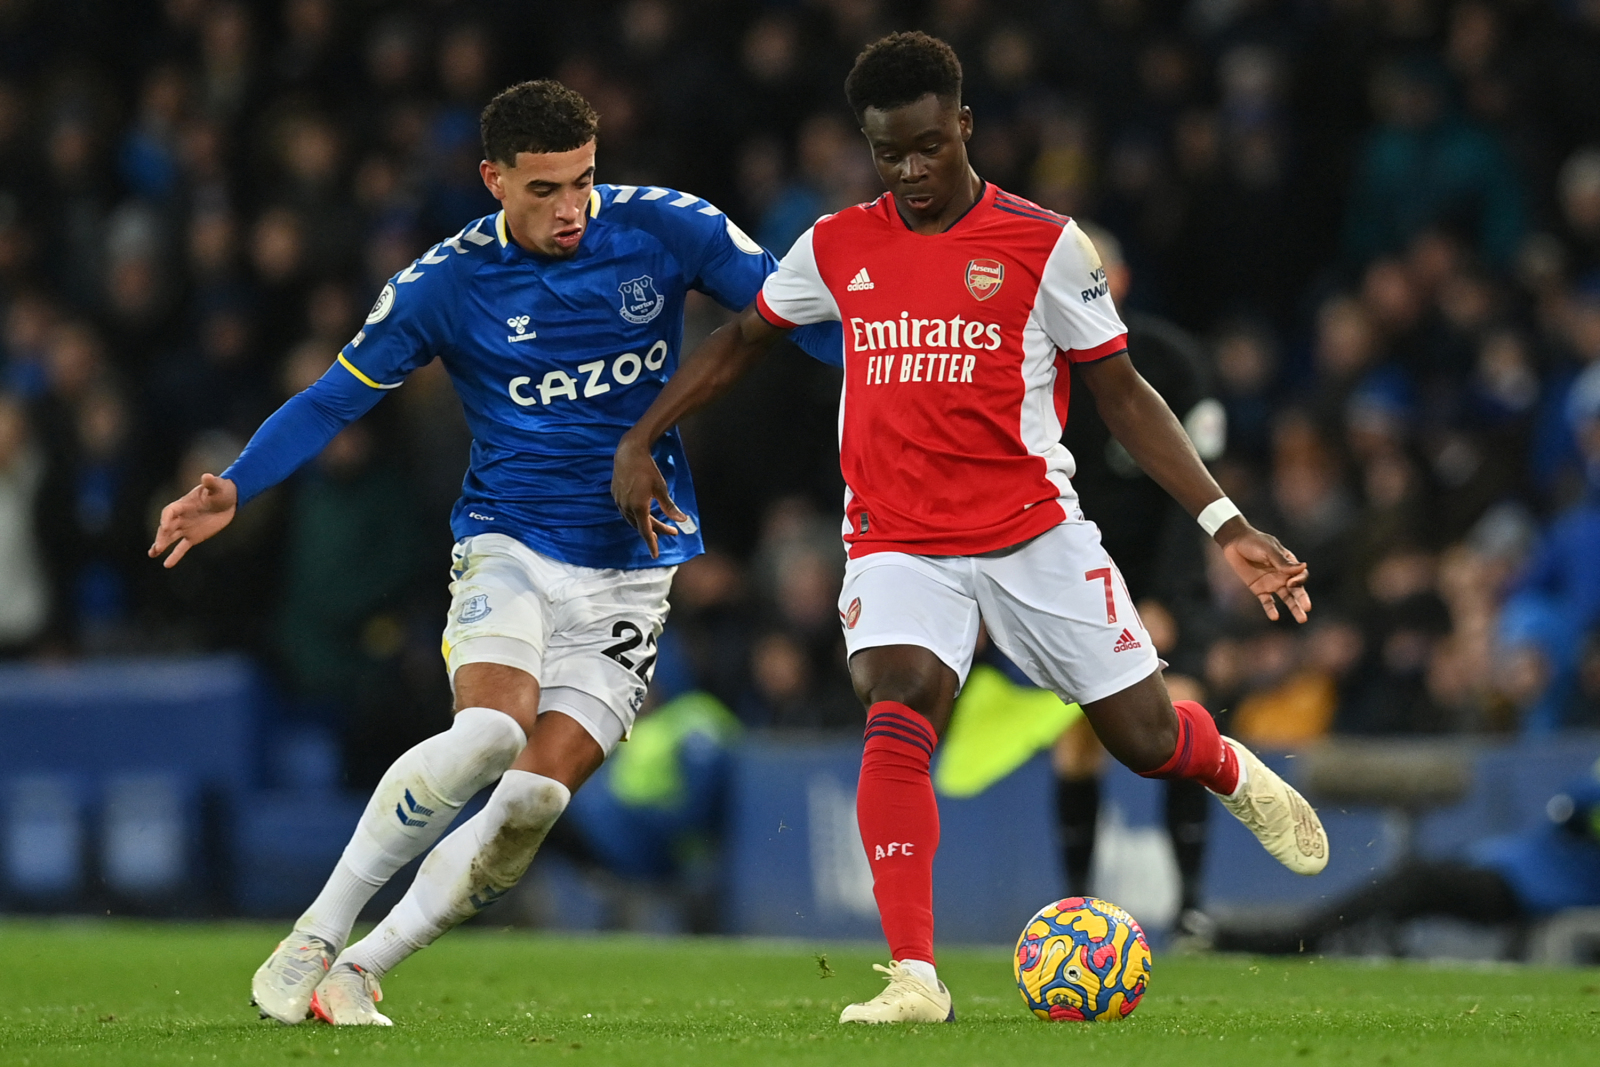 Everton vs Arsenal: Match preview, team news, tickets and prediction